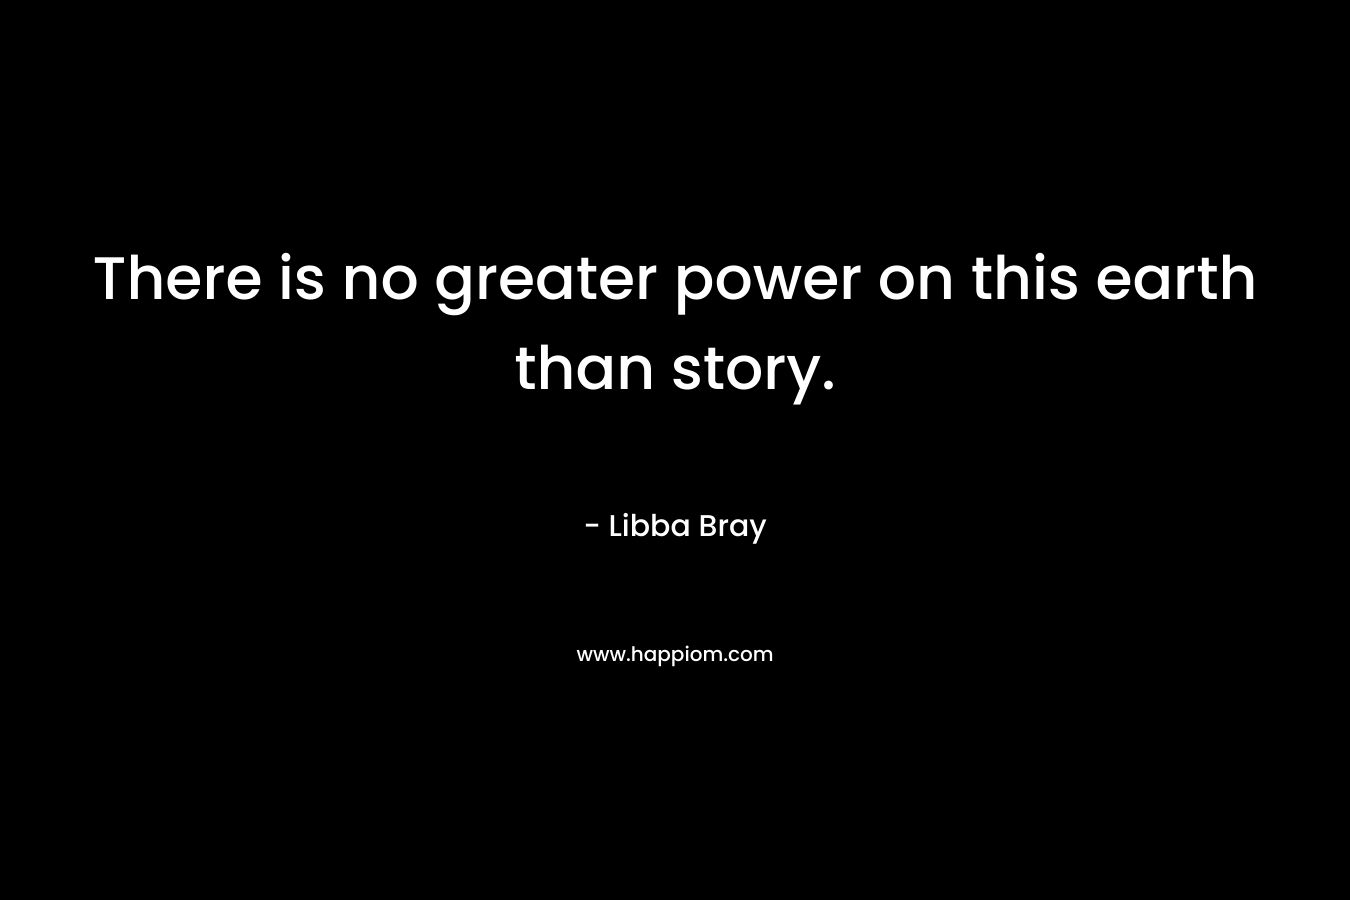 There is no greater power on this earth than story.